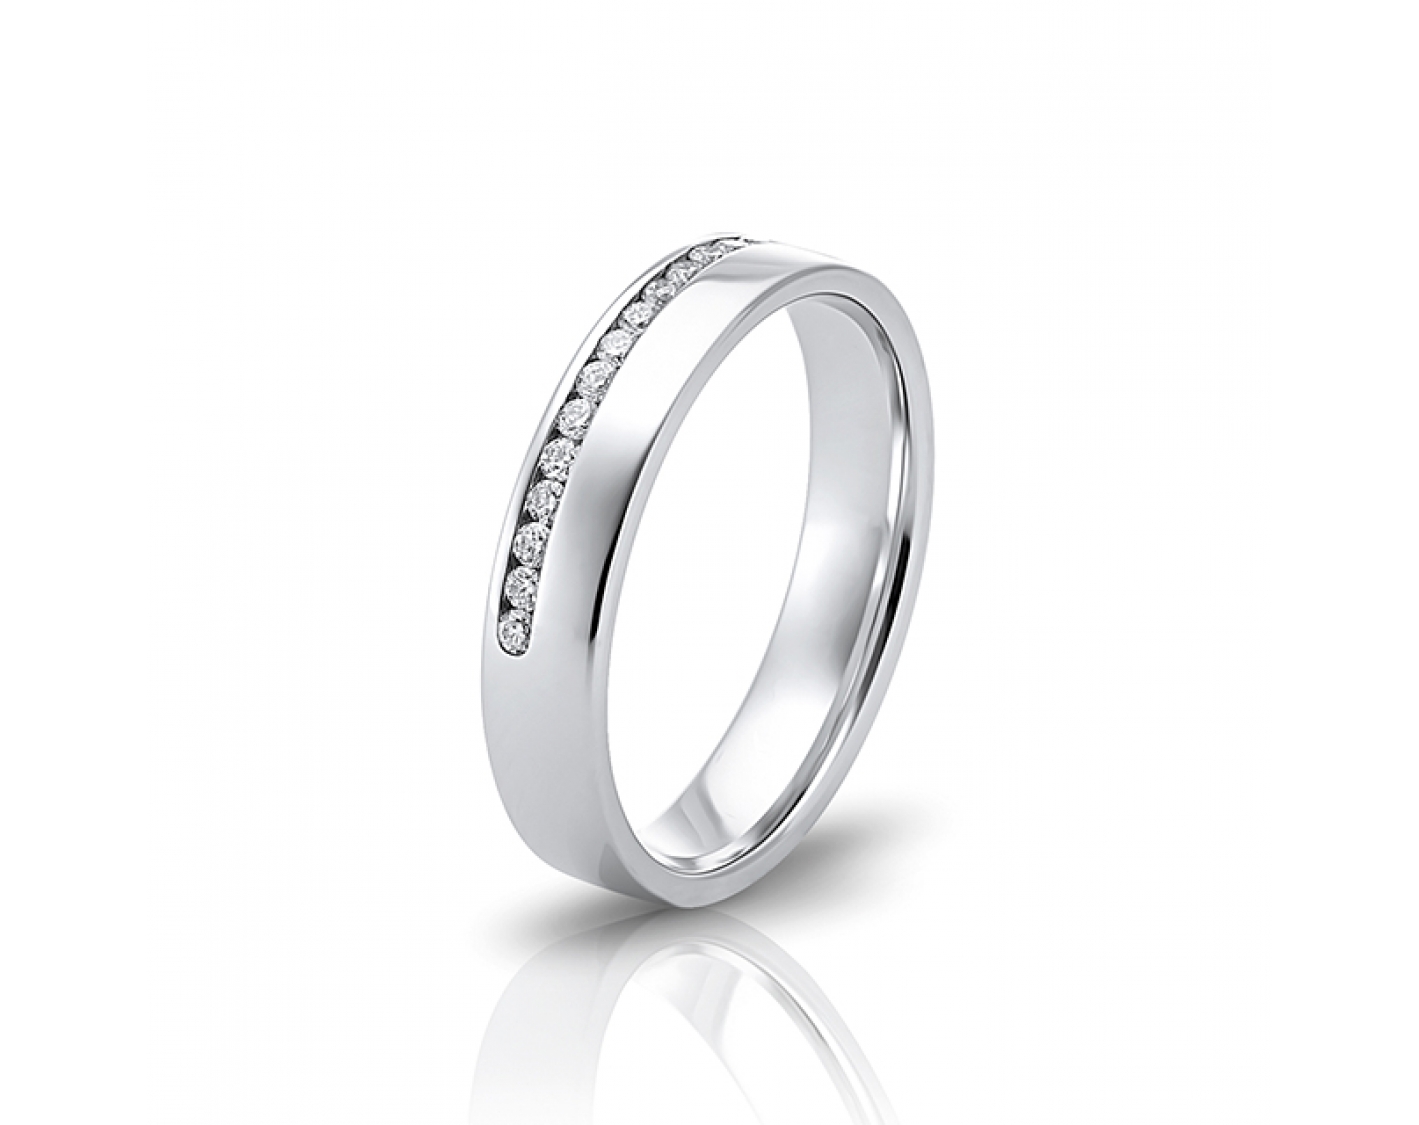 18k white gold 4mm wedding band with diamonds Photos & images